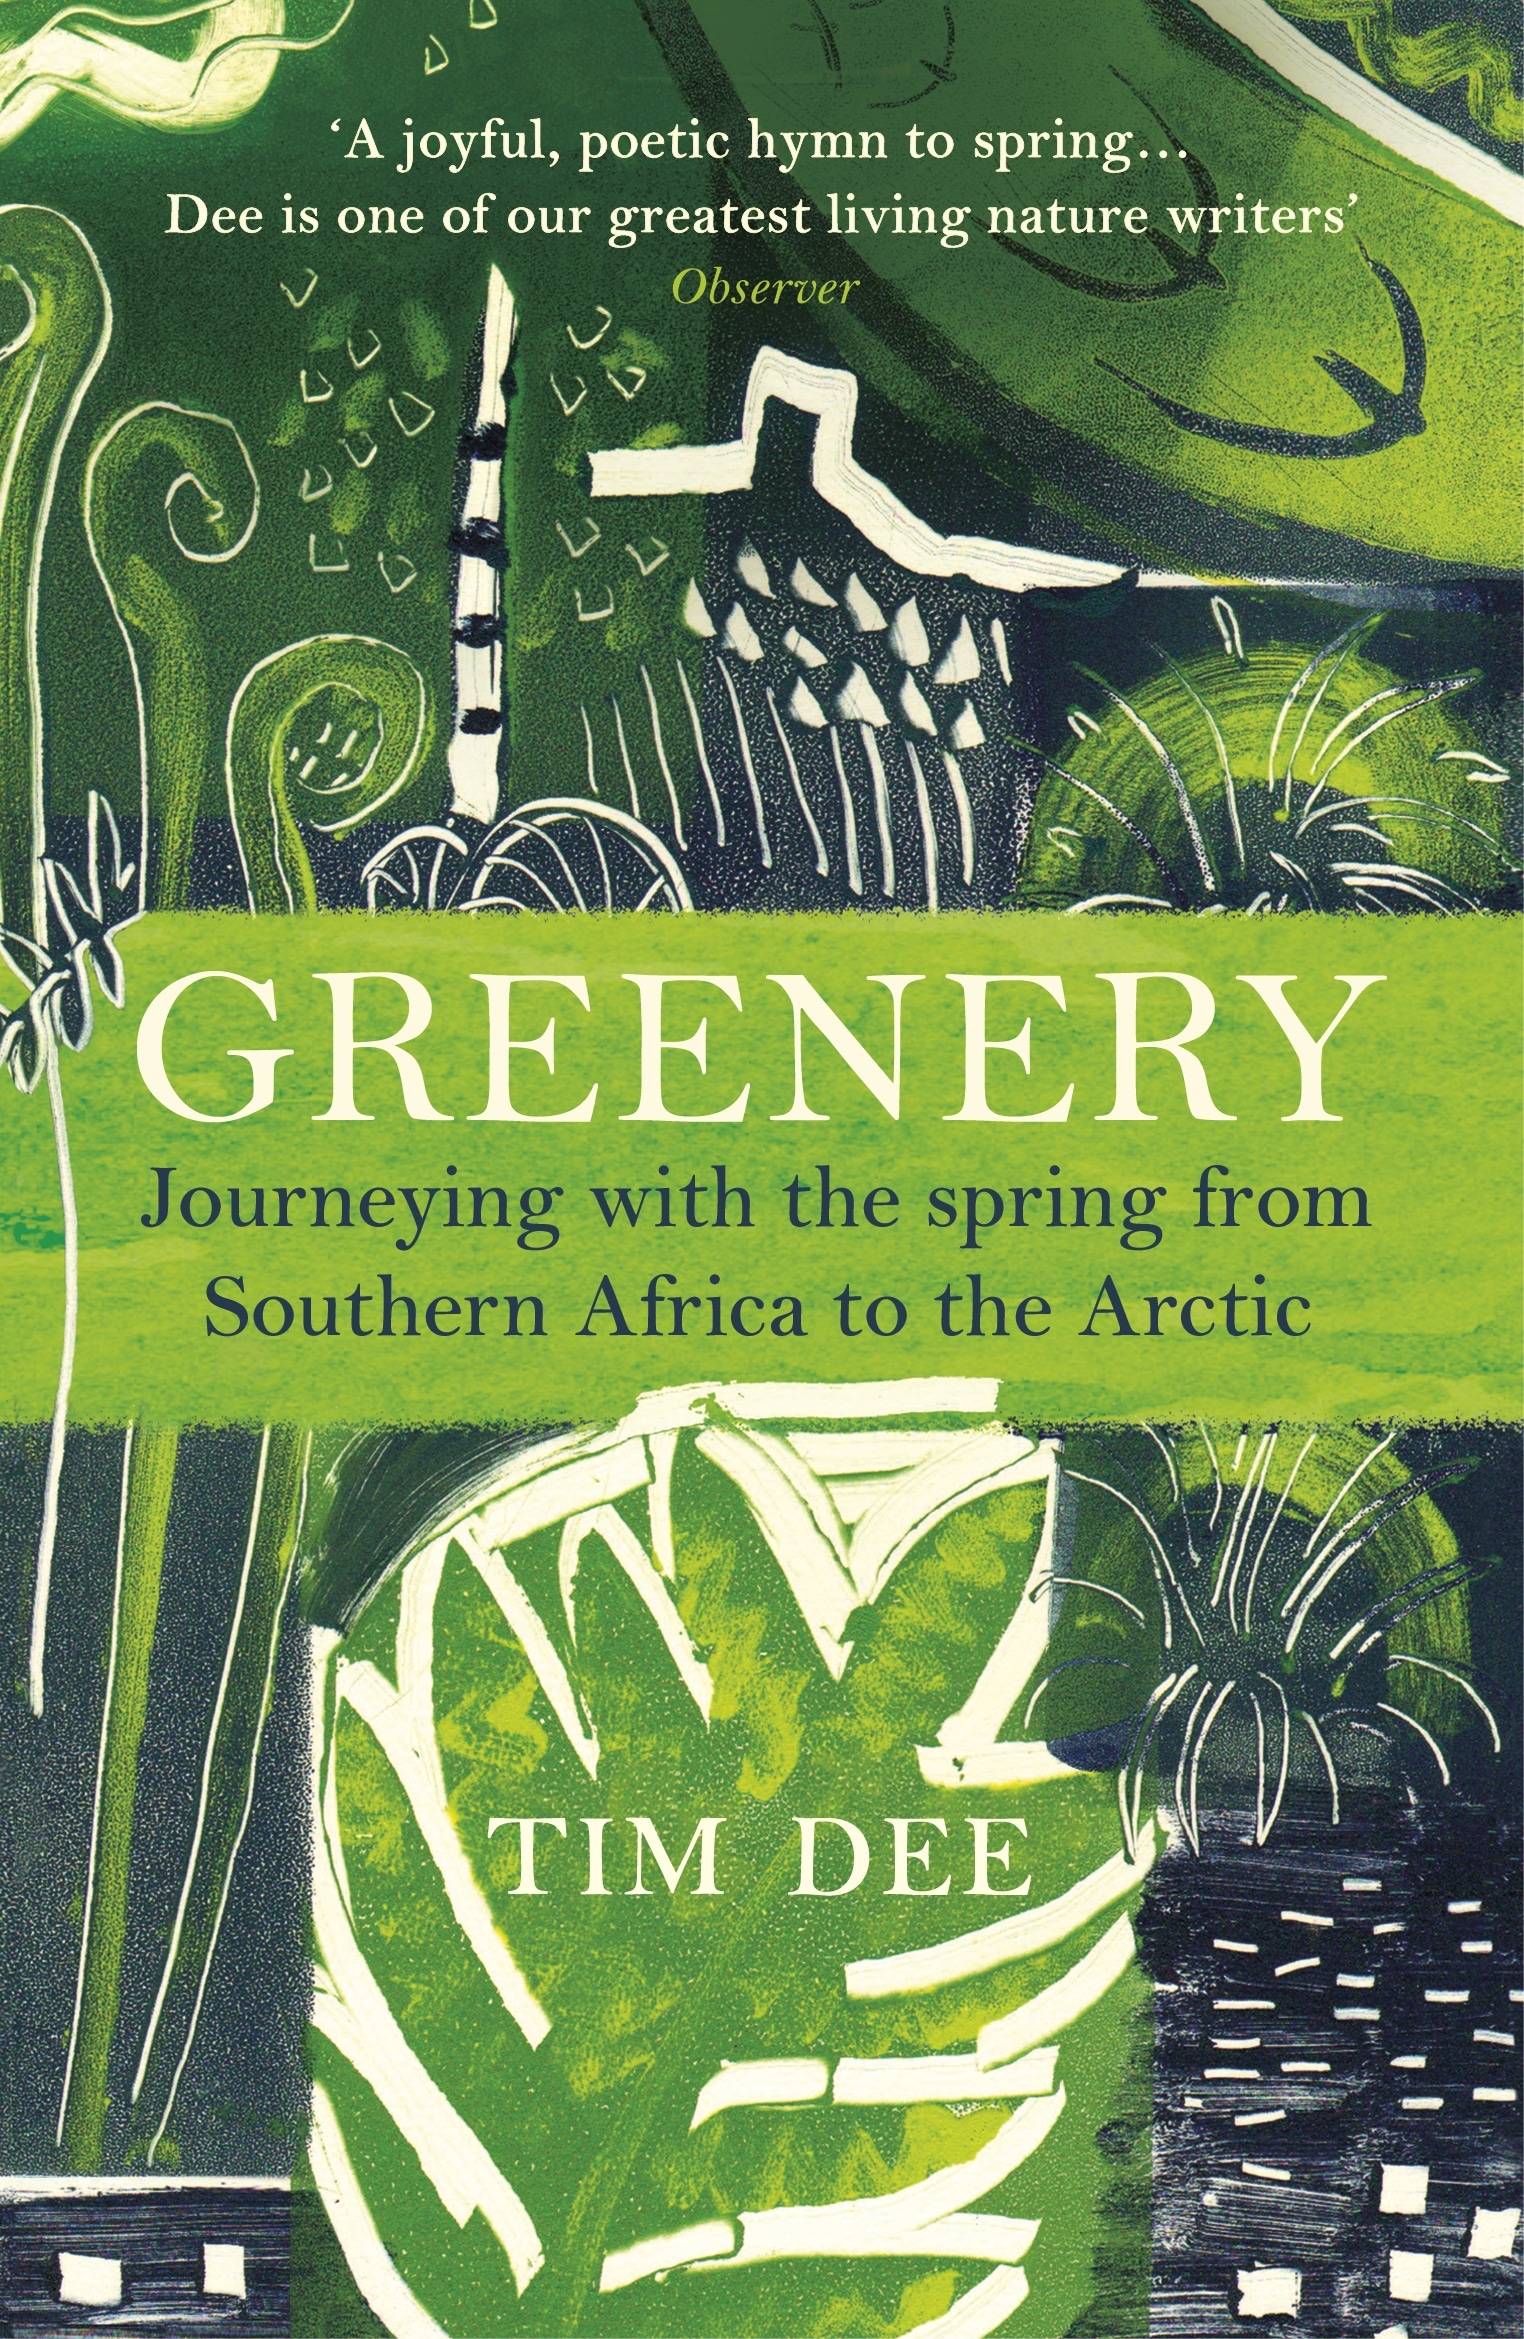 Book “Greenery” by Tim Dee — March 25, 2021